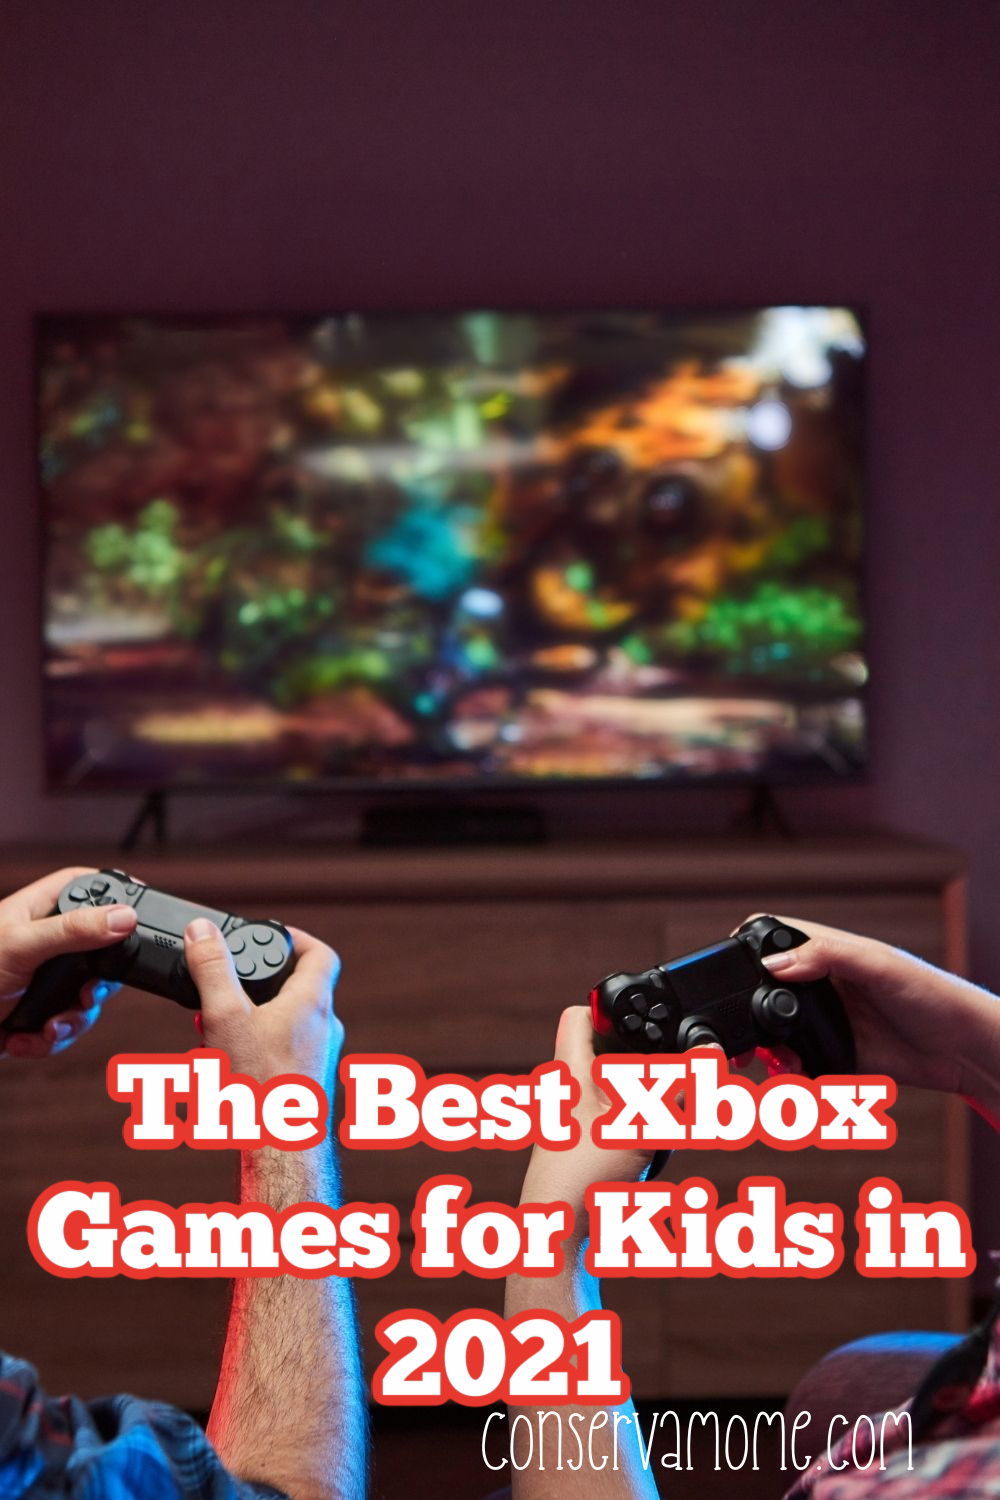 The Best Xbox Games for Kids in 2021